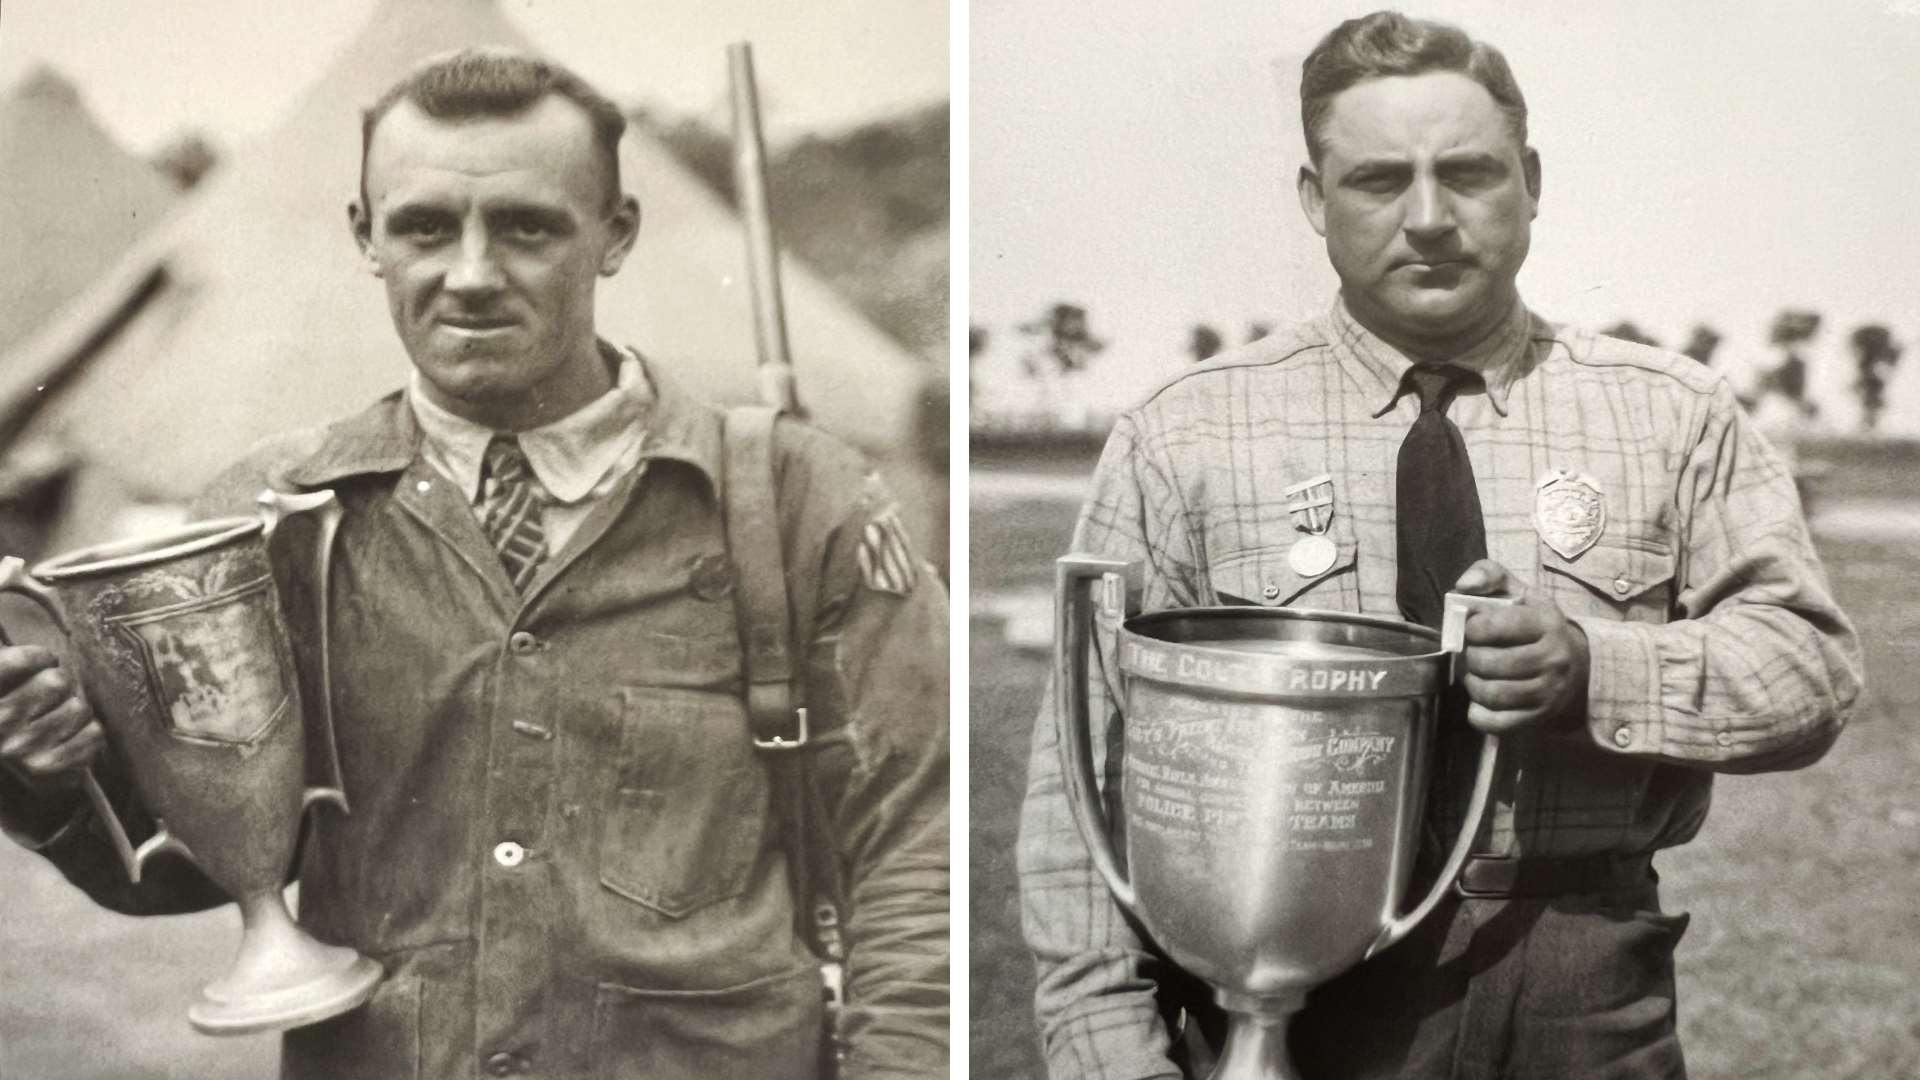 Peters Trophy and Colt Trophy